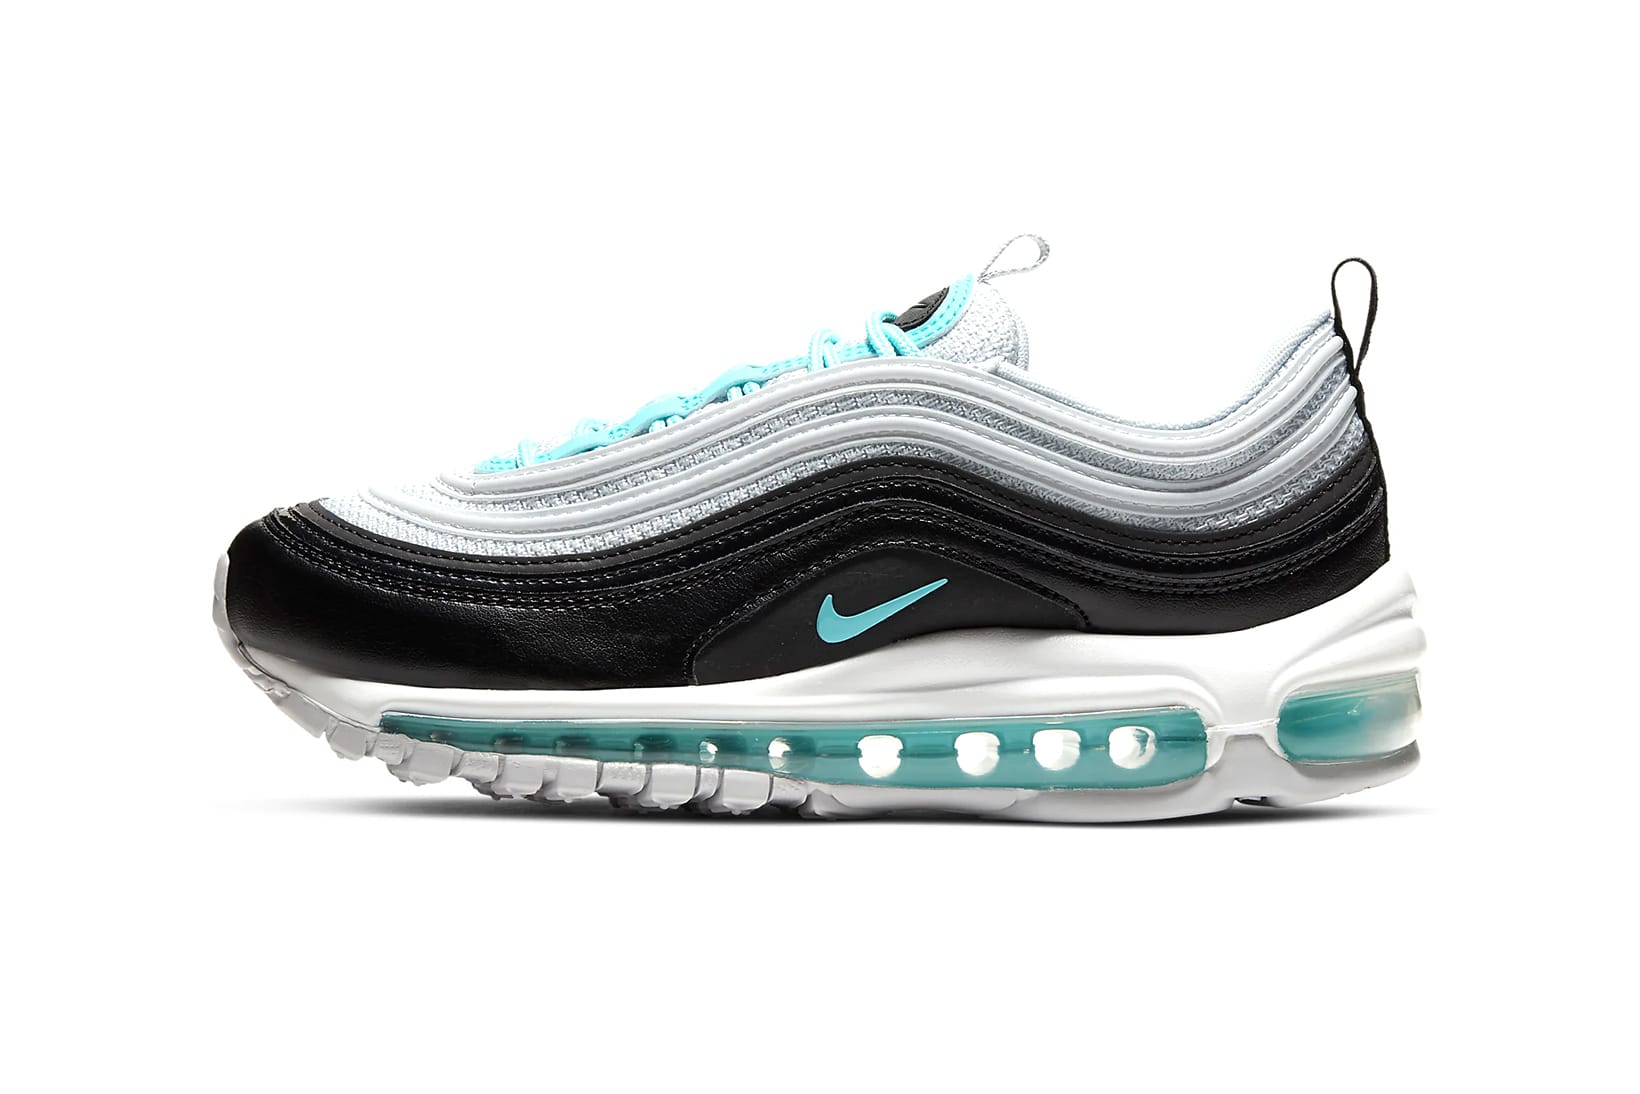 Air Max 97 in Three New Colorways 